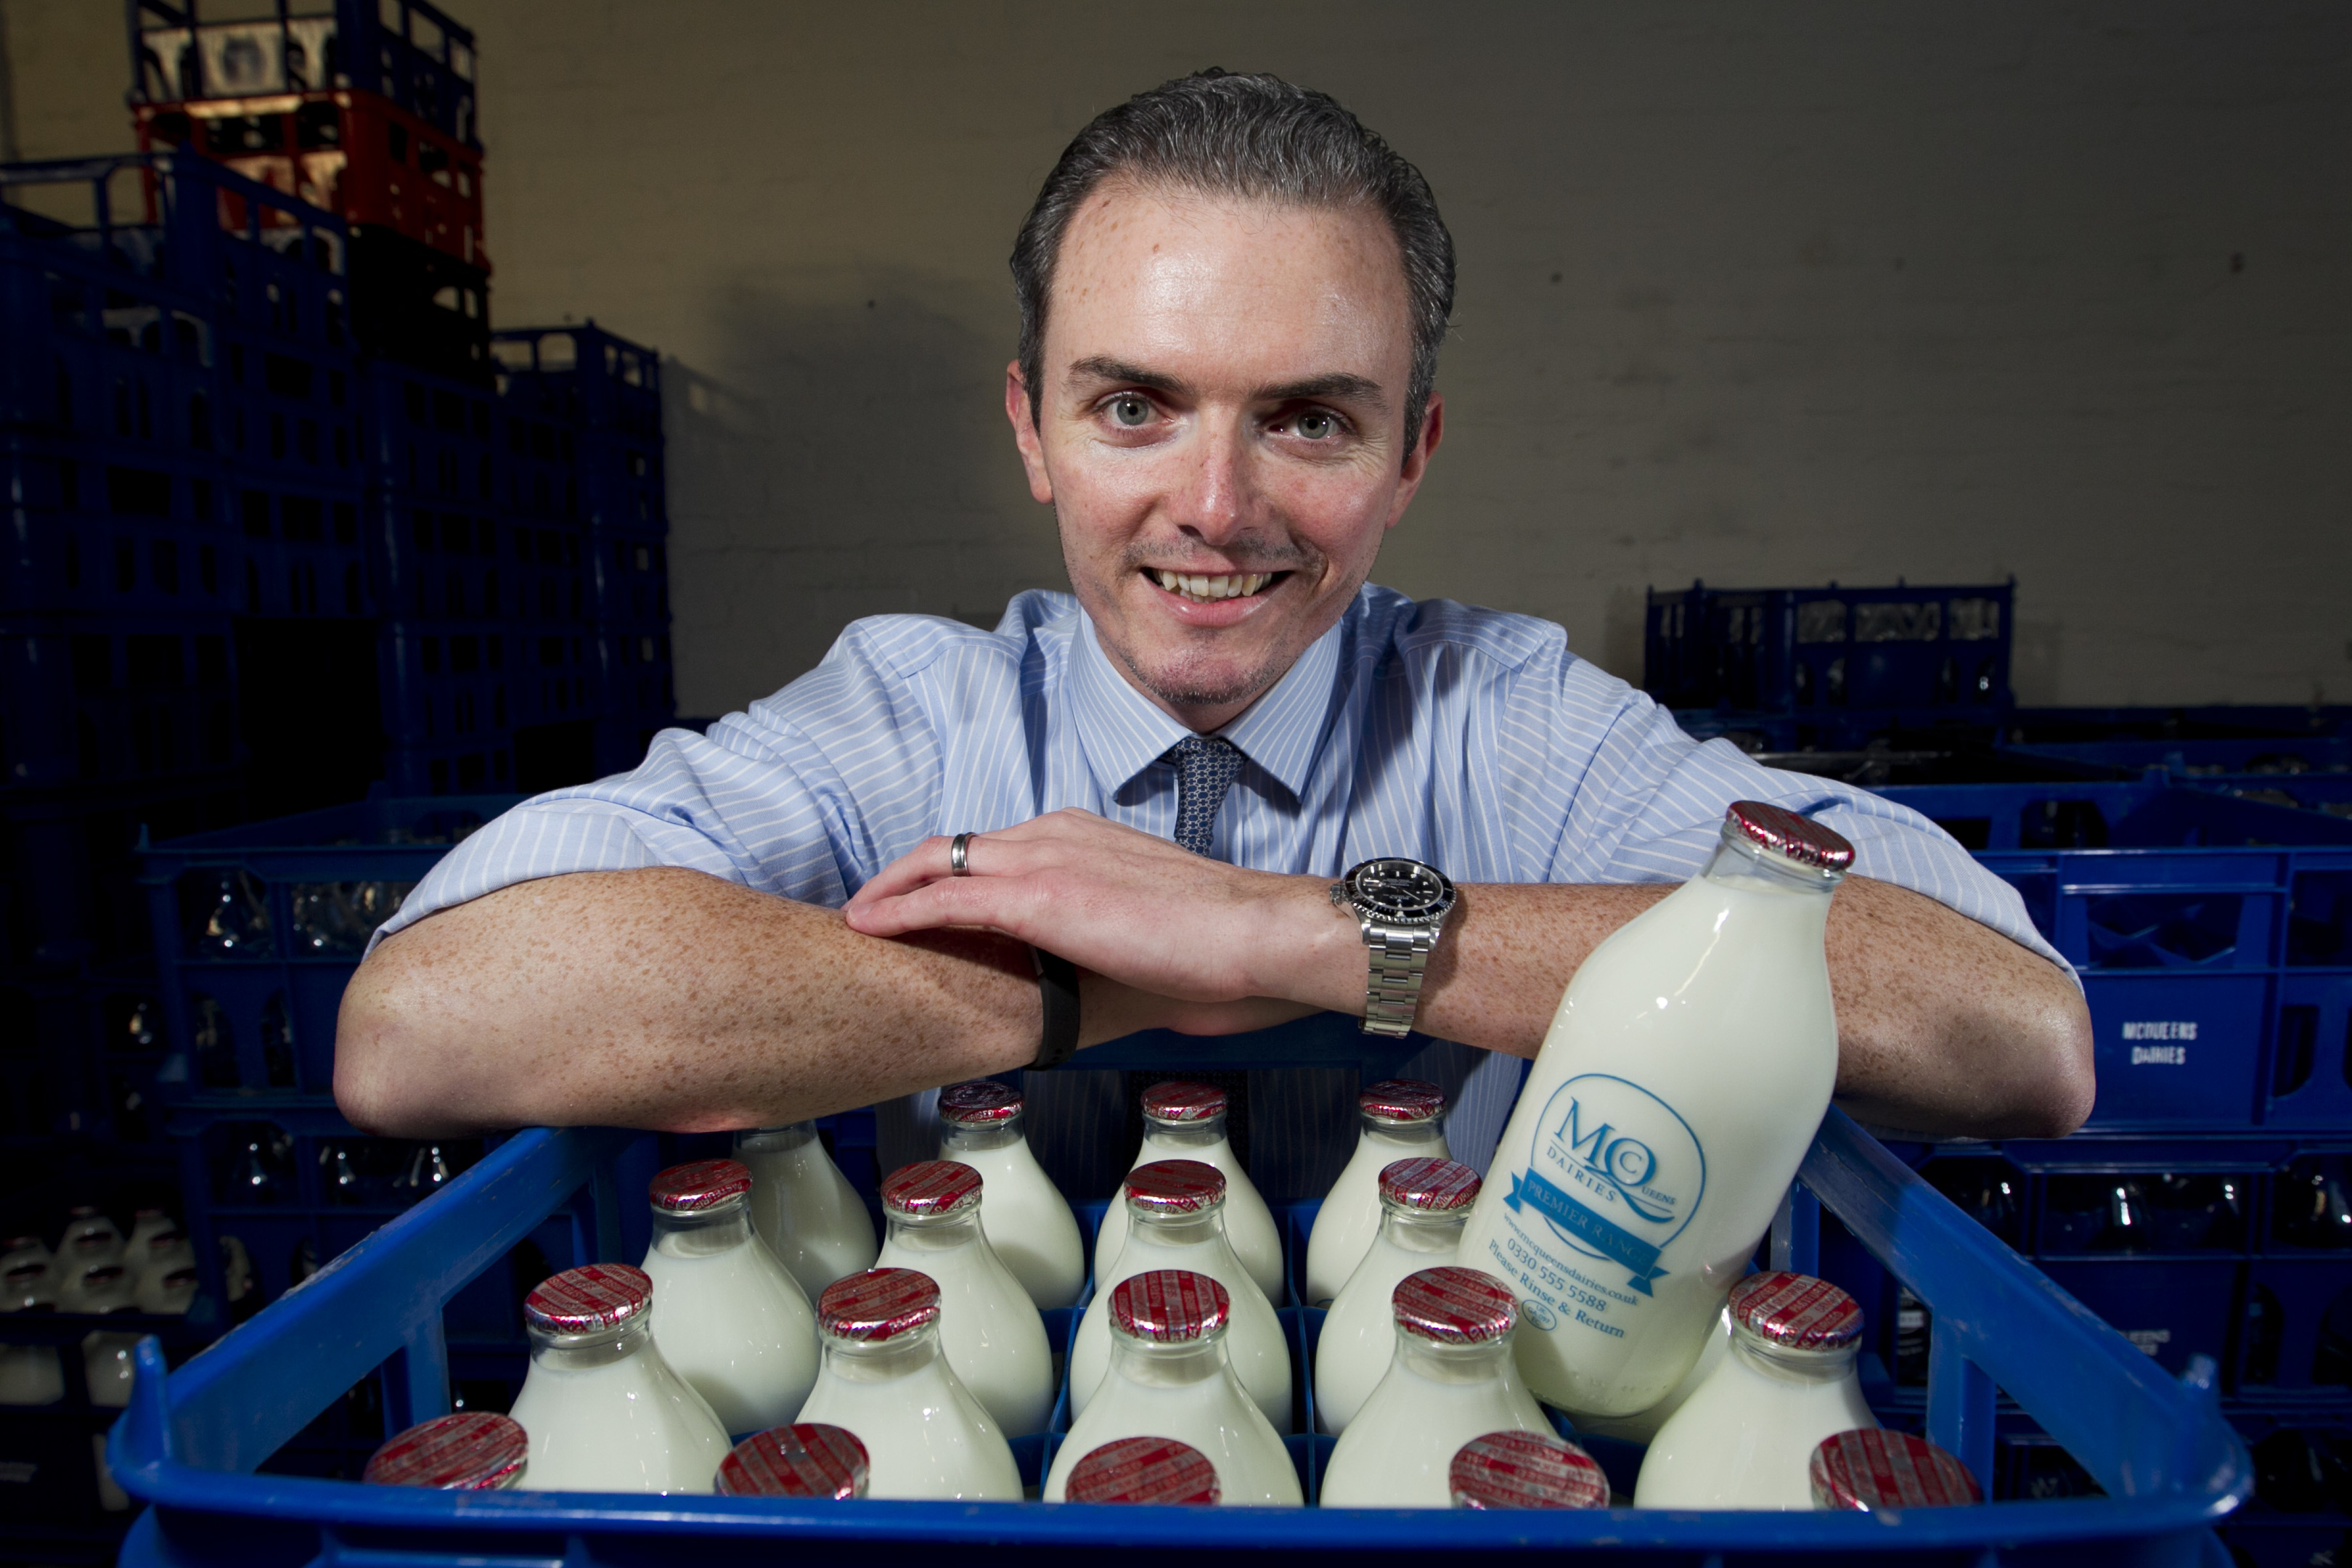 Callum McQueen, owner of McQueen's Dairy, which is seeing rising demand from people wanting glass milk bottles delivered to their door (Andrew Cawley / DC Thomson)